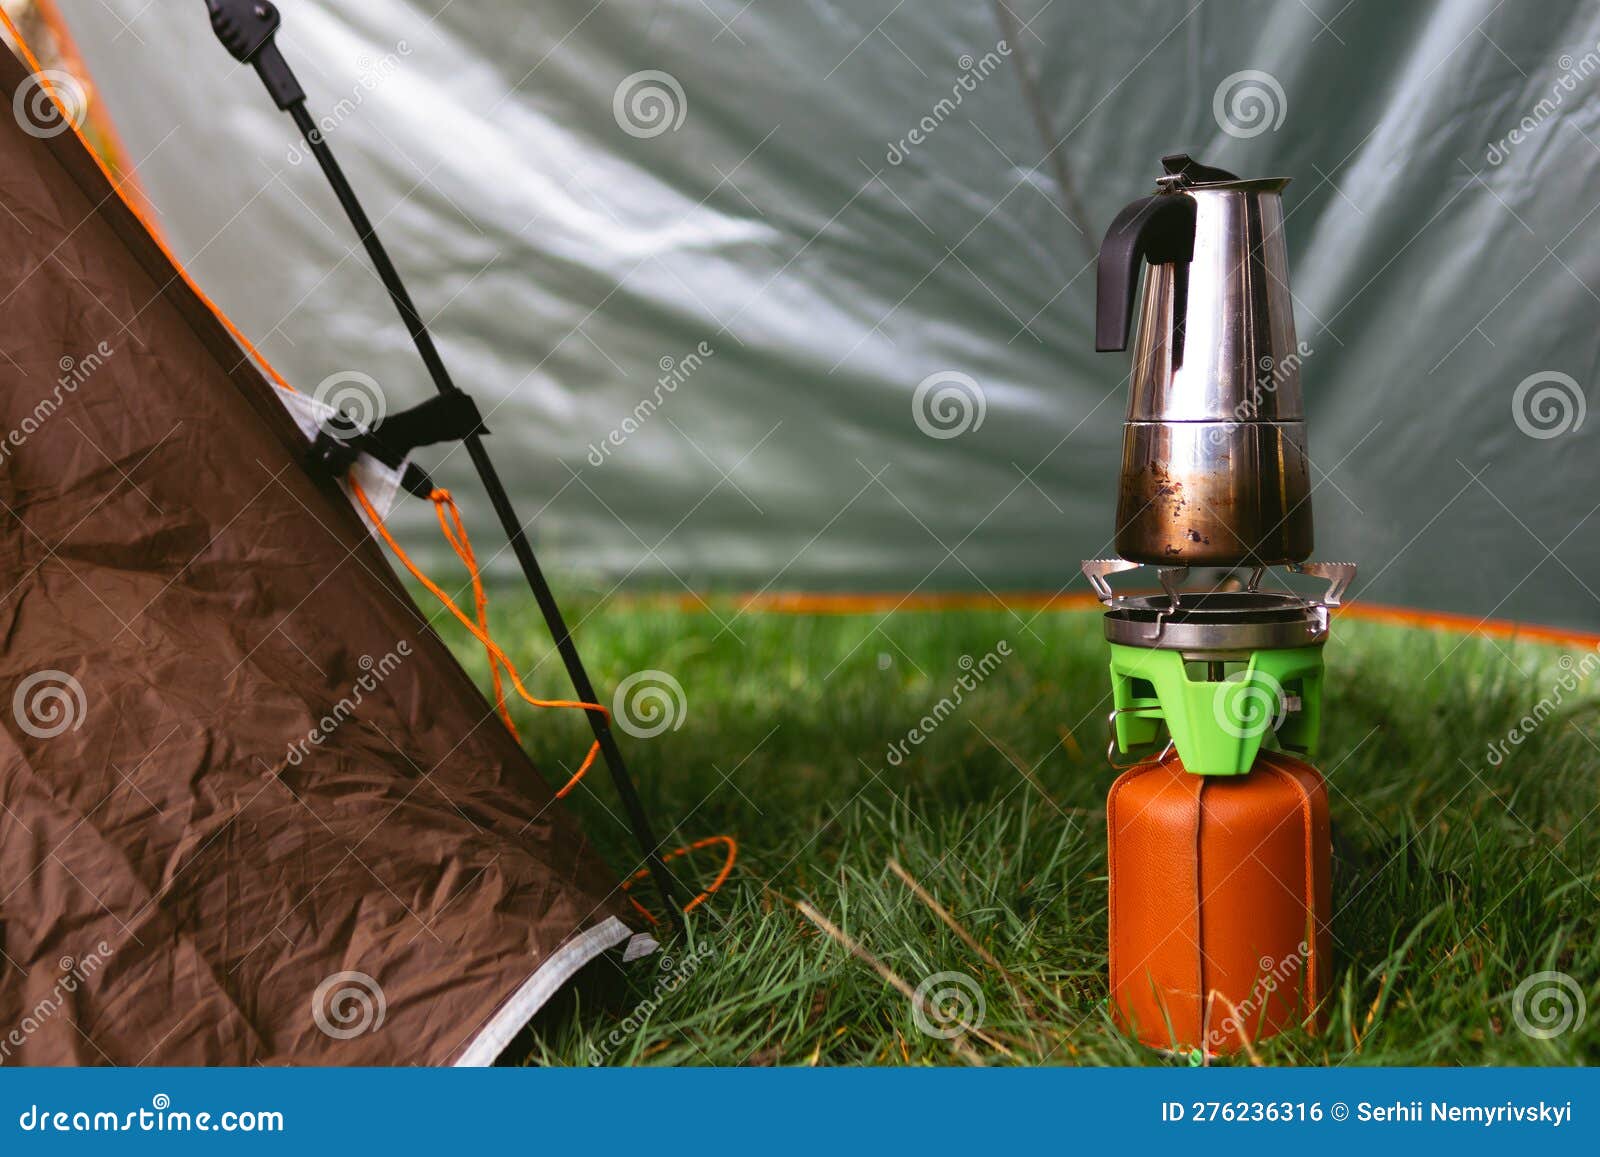 https://thumbs.dreamstime.com/z/compact-gas-burner-fuel-cylinder-covered-brown-leather-cover-geyser-coffee-maker-cooking-field-portable-camping-276236316.jpg